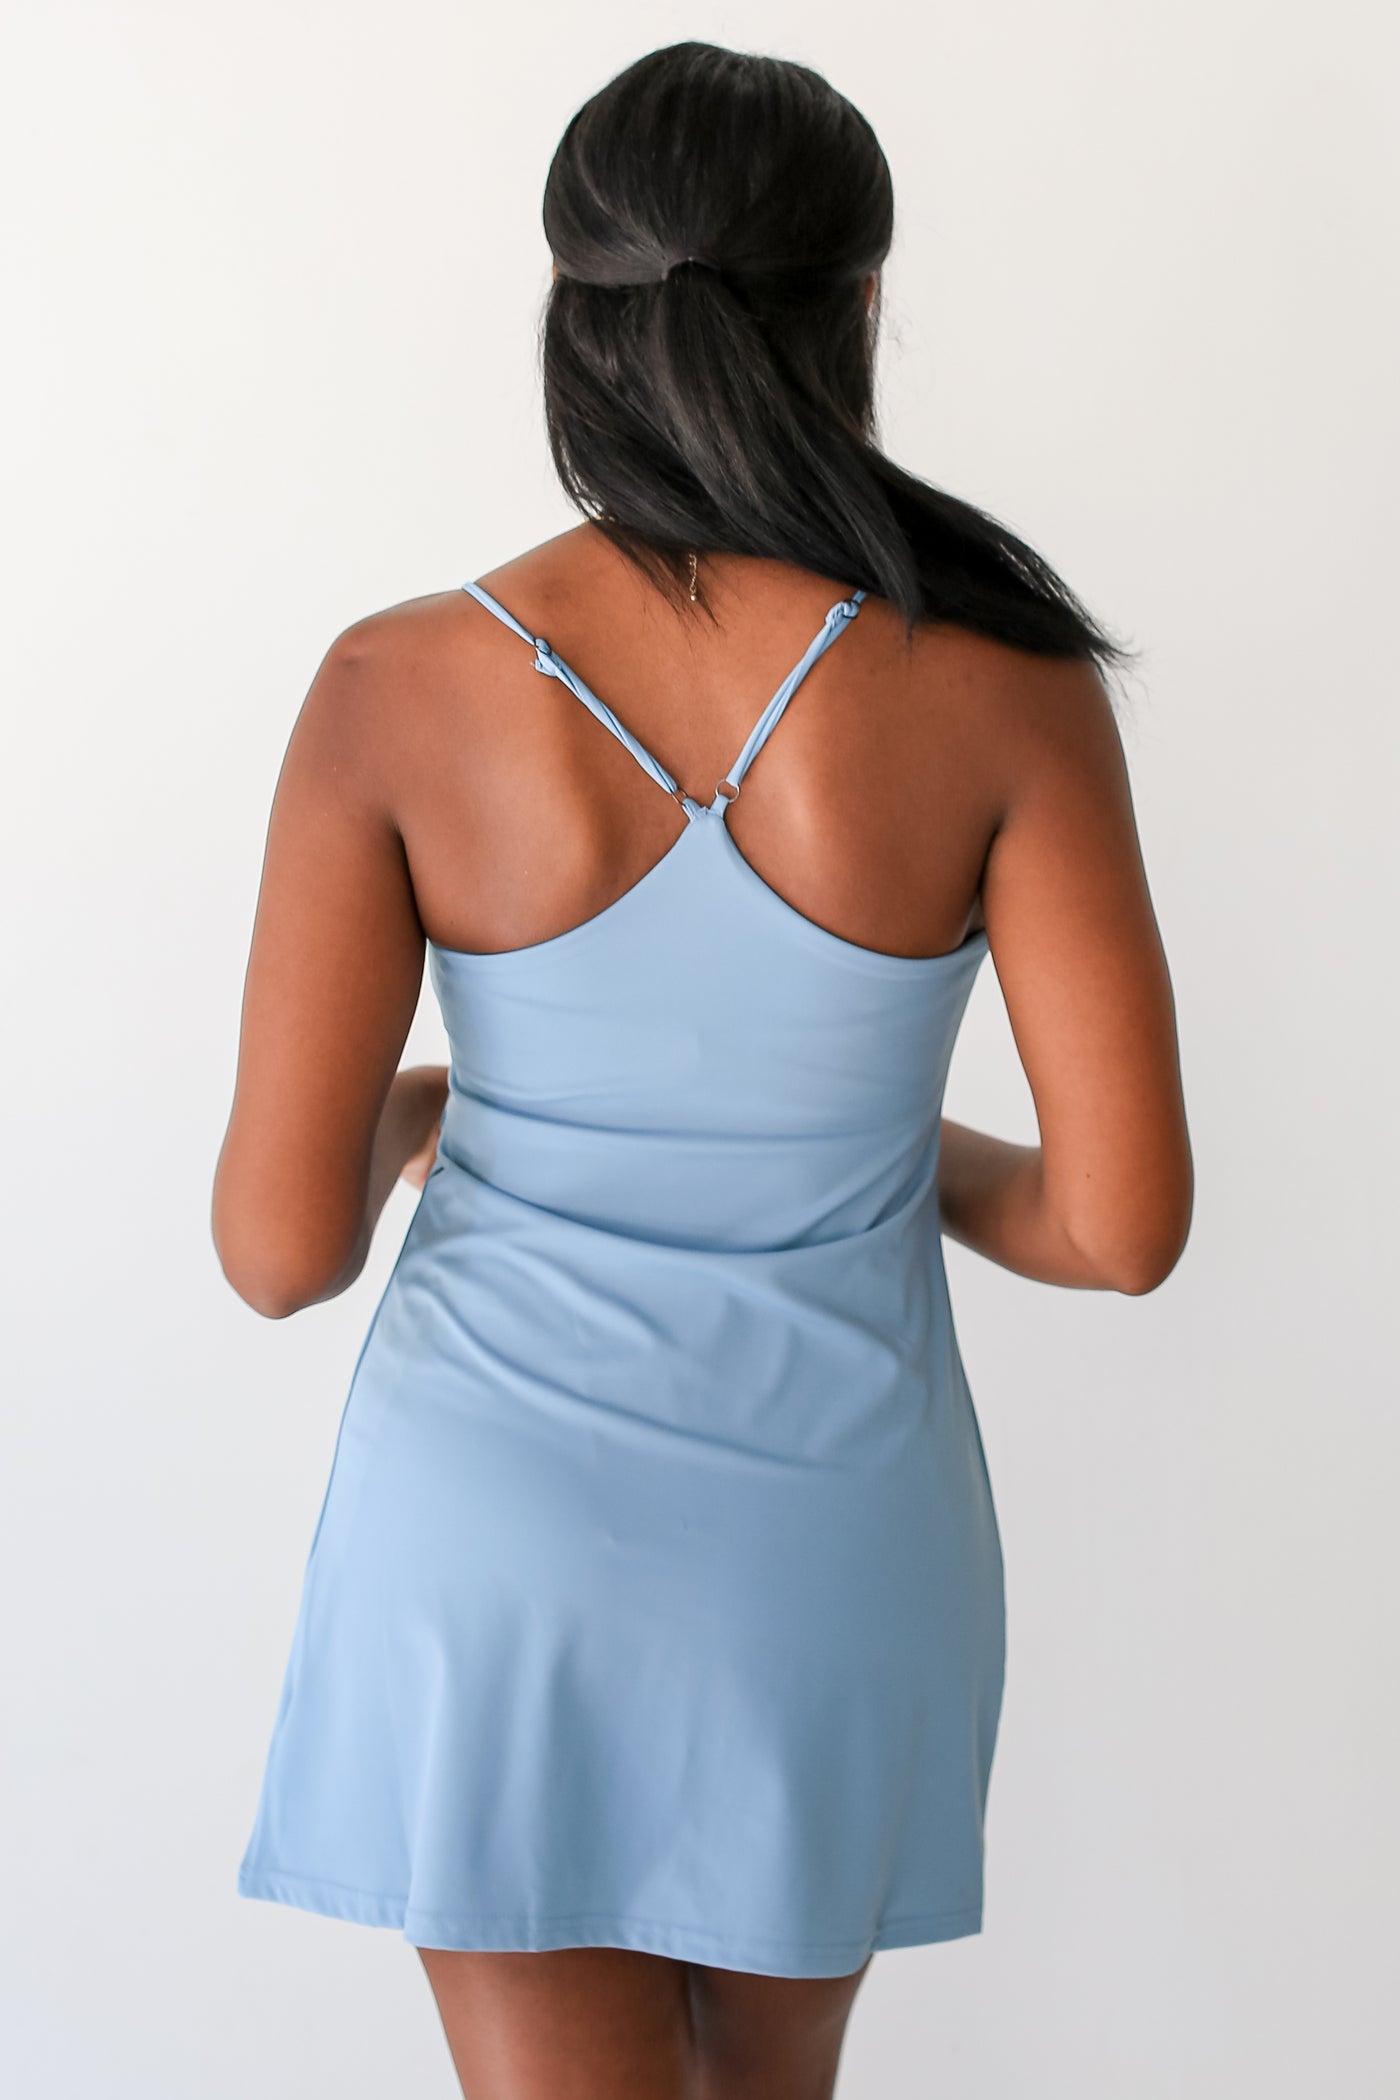 blue Athletic Dress back view